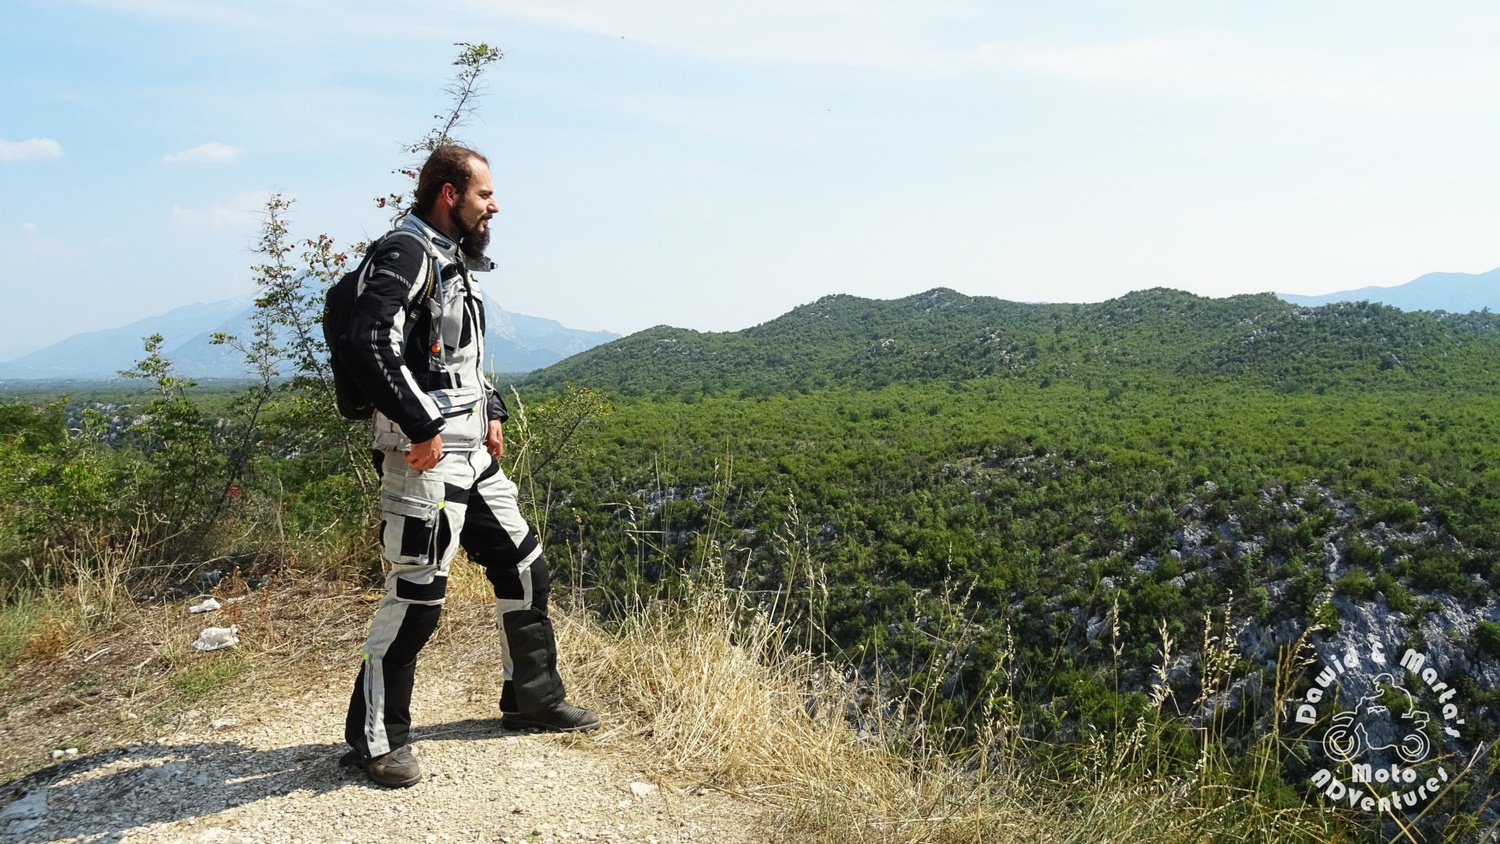 Motorcylist on the vantage point on the Cetina River canyon